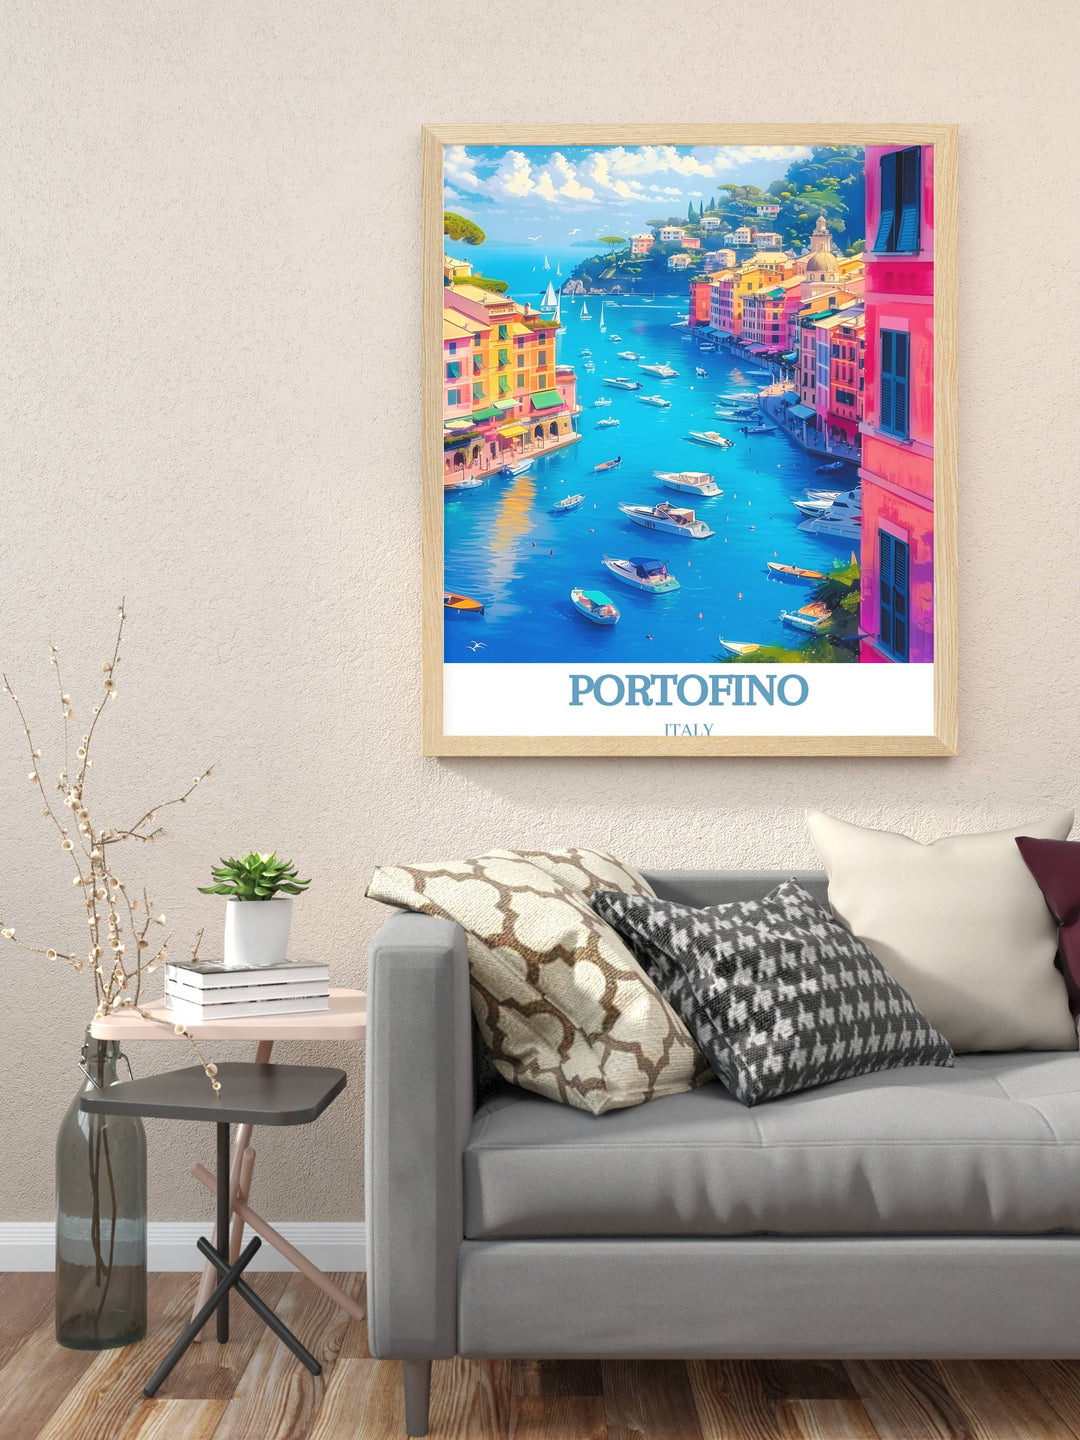 Italian Riviera Wall Art showcasing the picturesque village of Portofino, with its colorful houses and shimmering waters, perfect for adding a touch of elegance to any room.